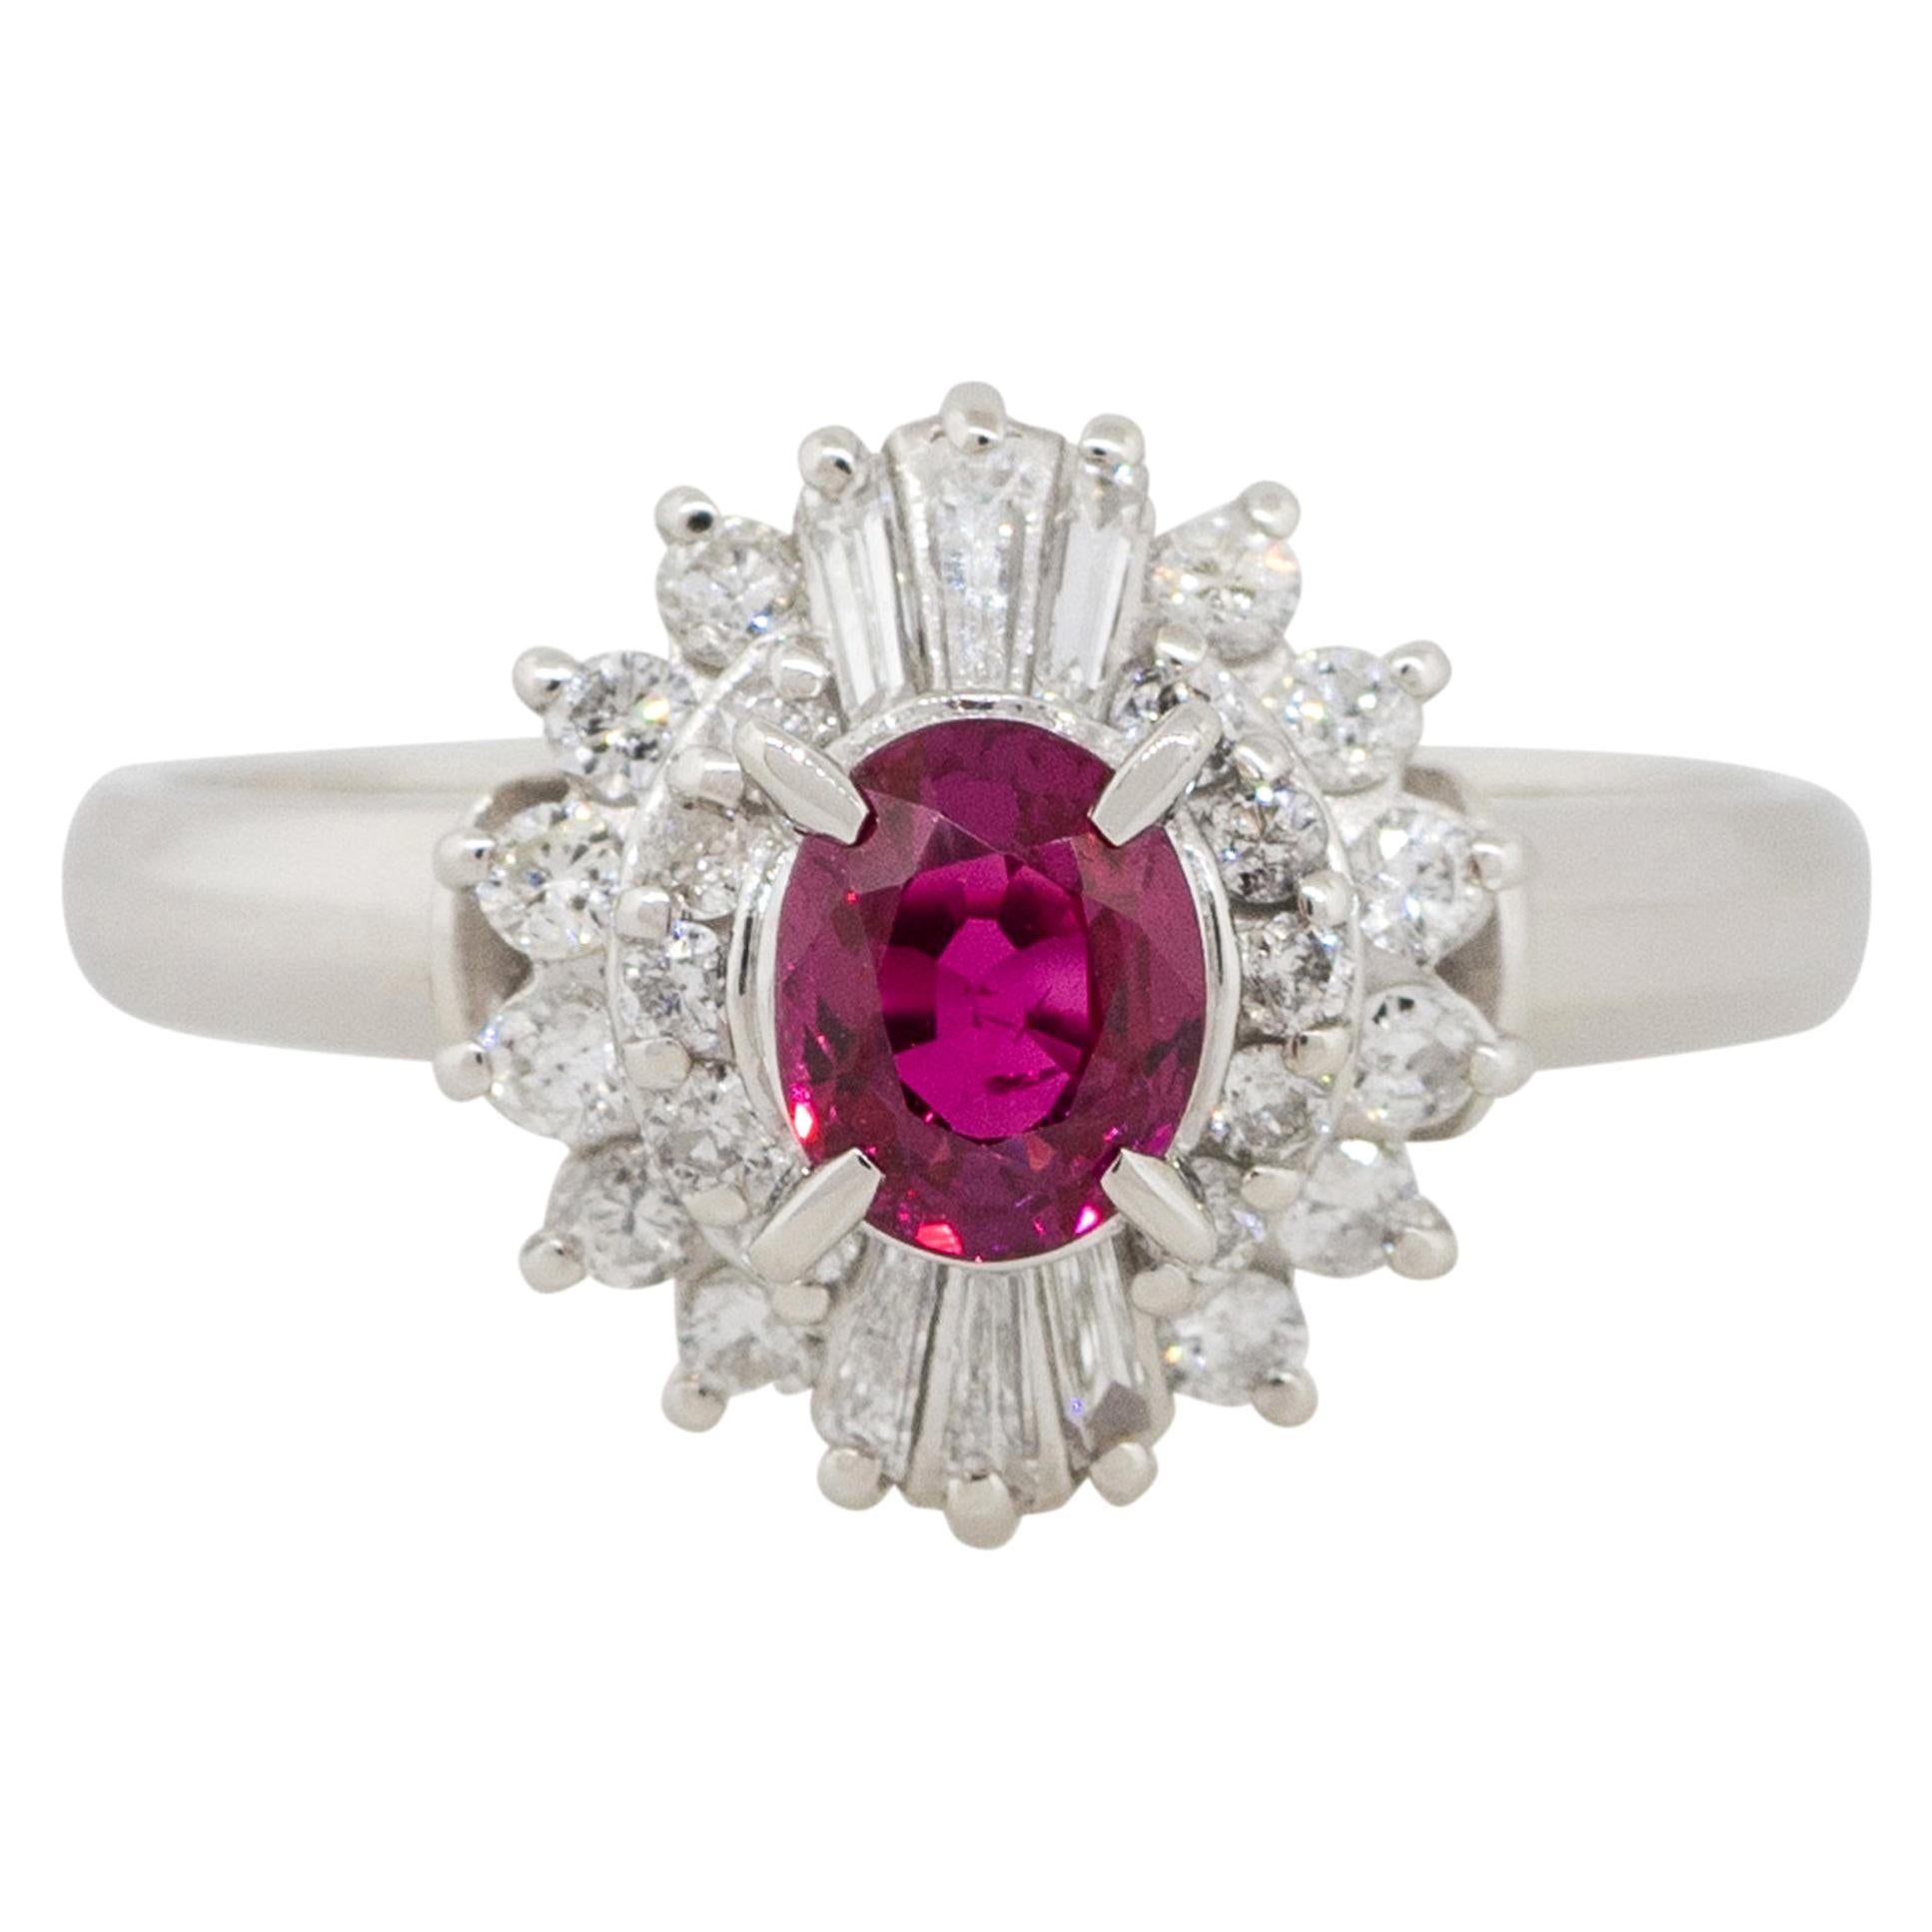 0.72 Carat Oval Ruby Center Diamond Cocktail Ring Platinum in Stock